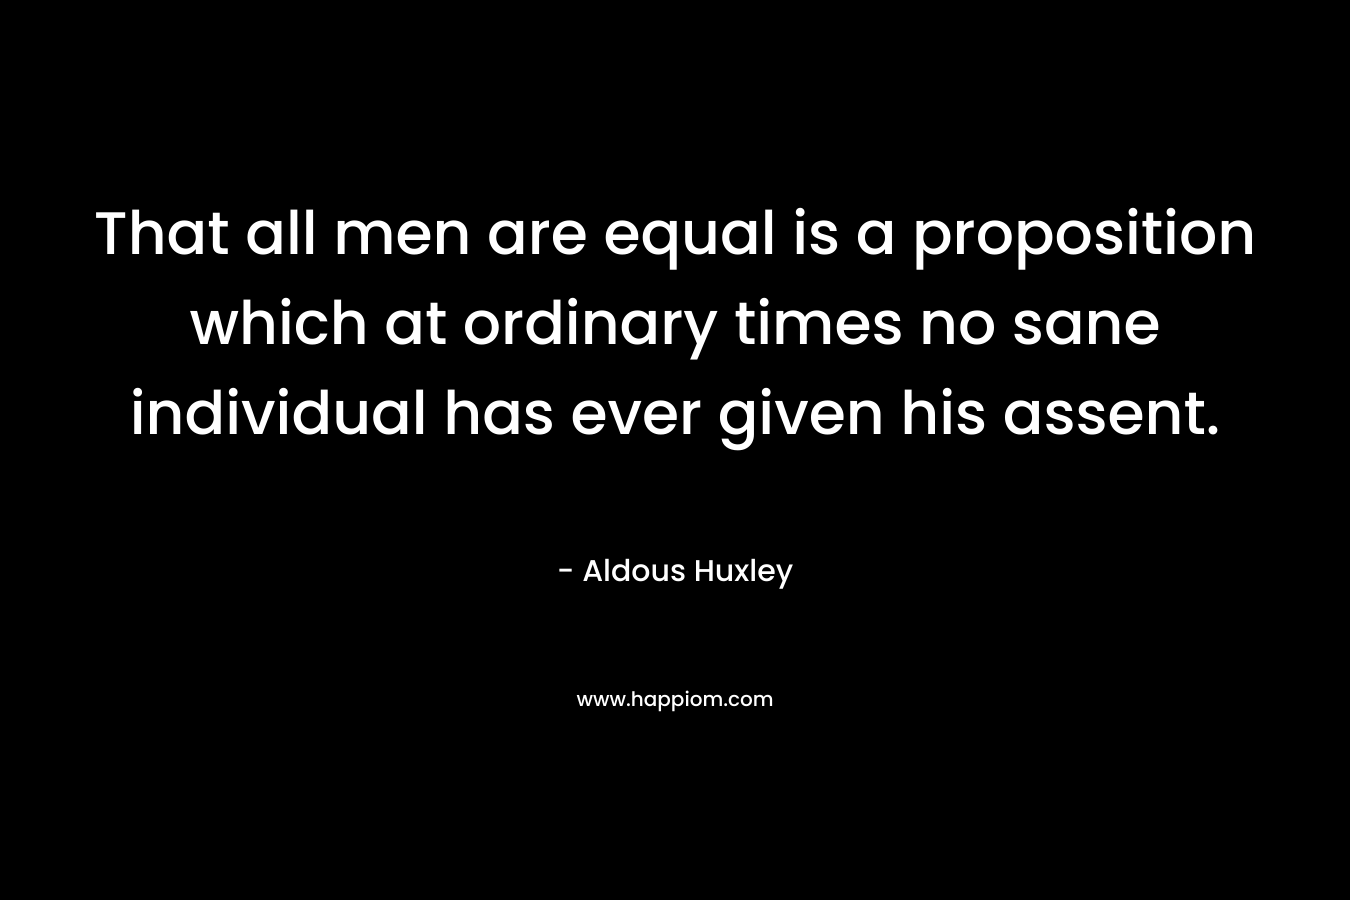 That all men are equal is a proposition which at ordinary times no sane individual has ever given his assent. – Aldous Huxley